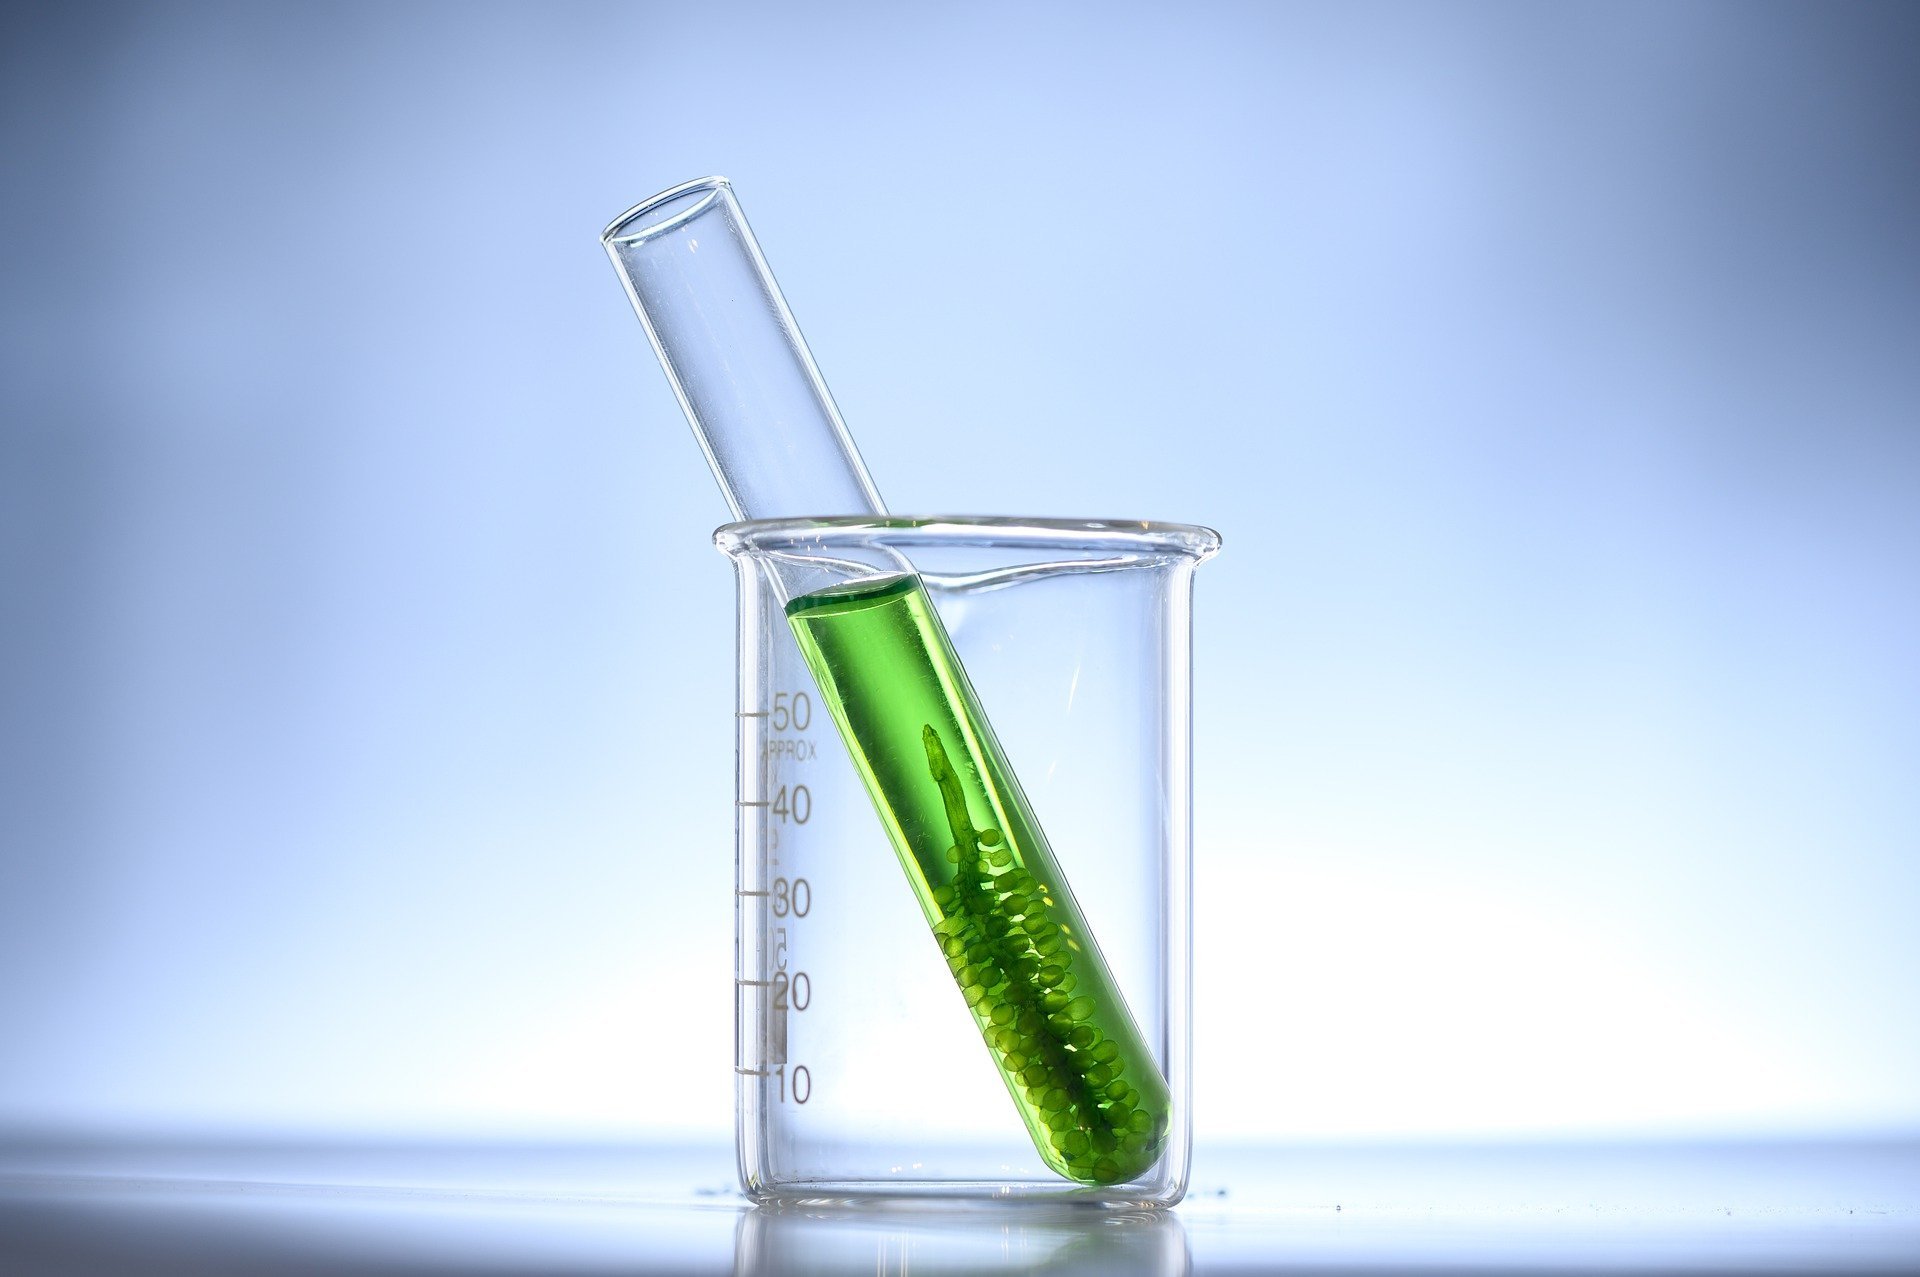 Value chemicals and biopolymers from Microalgal biomass